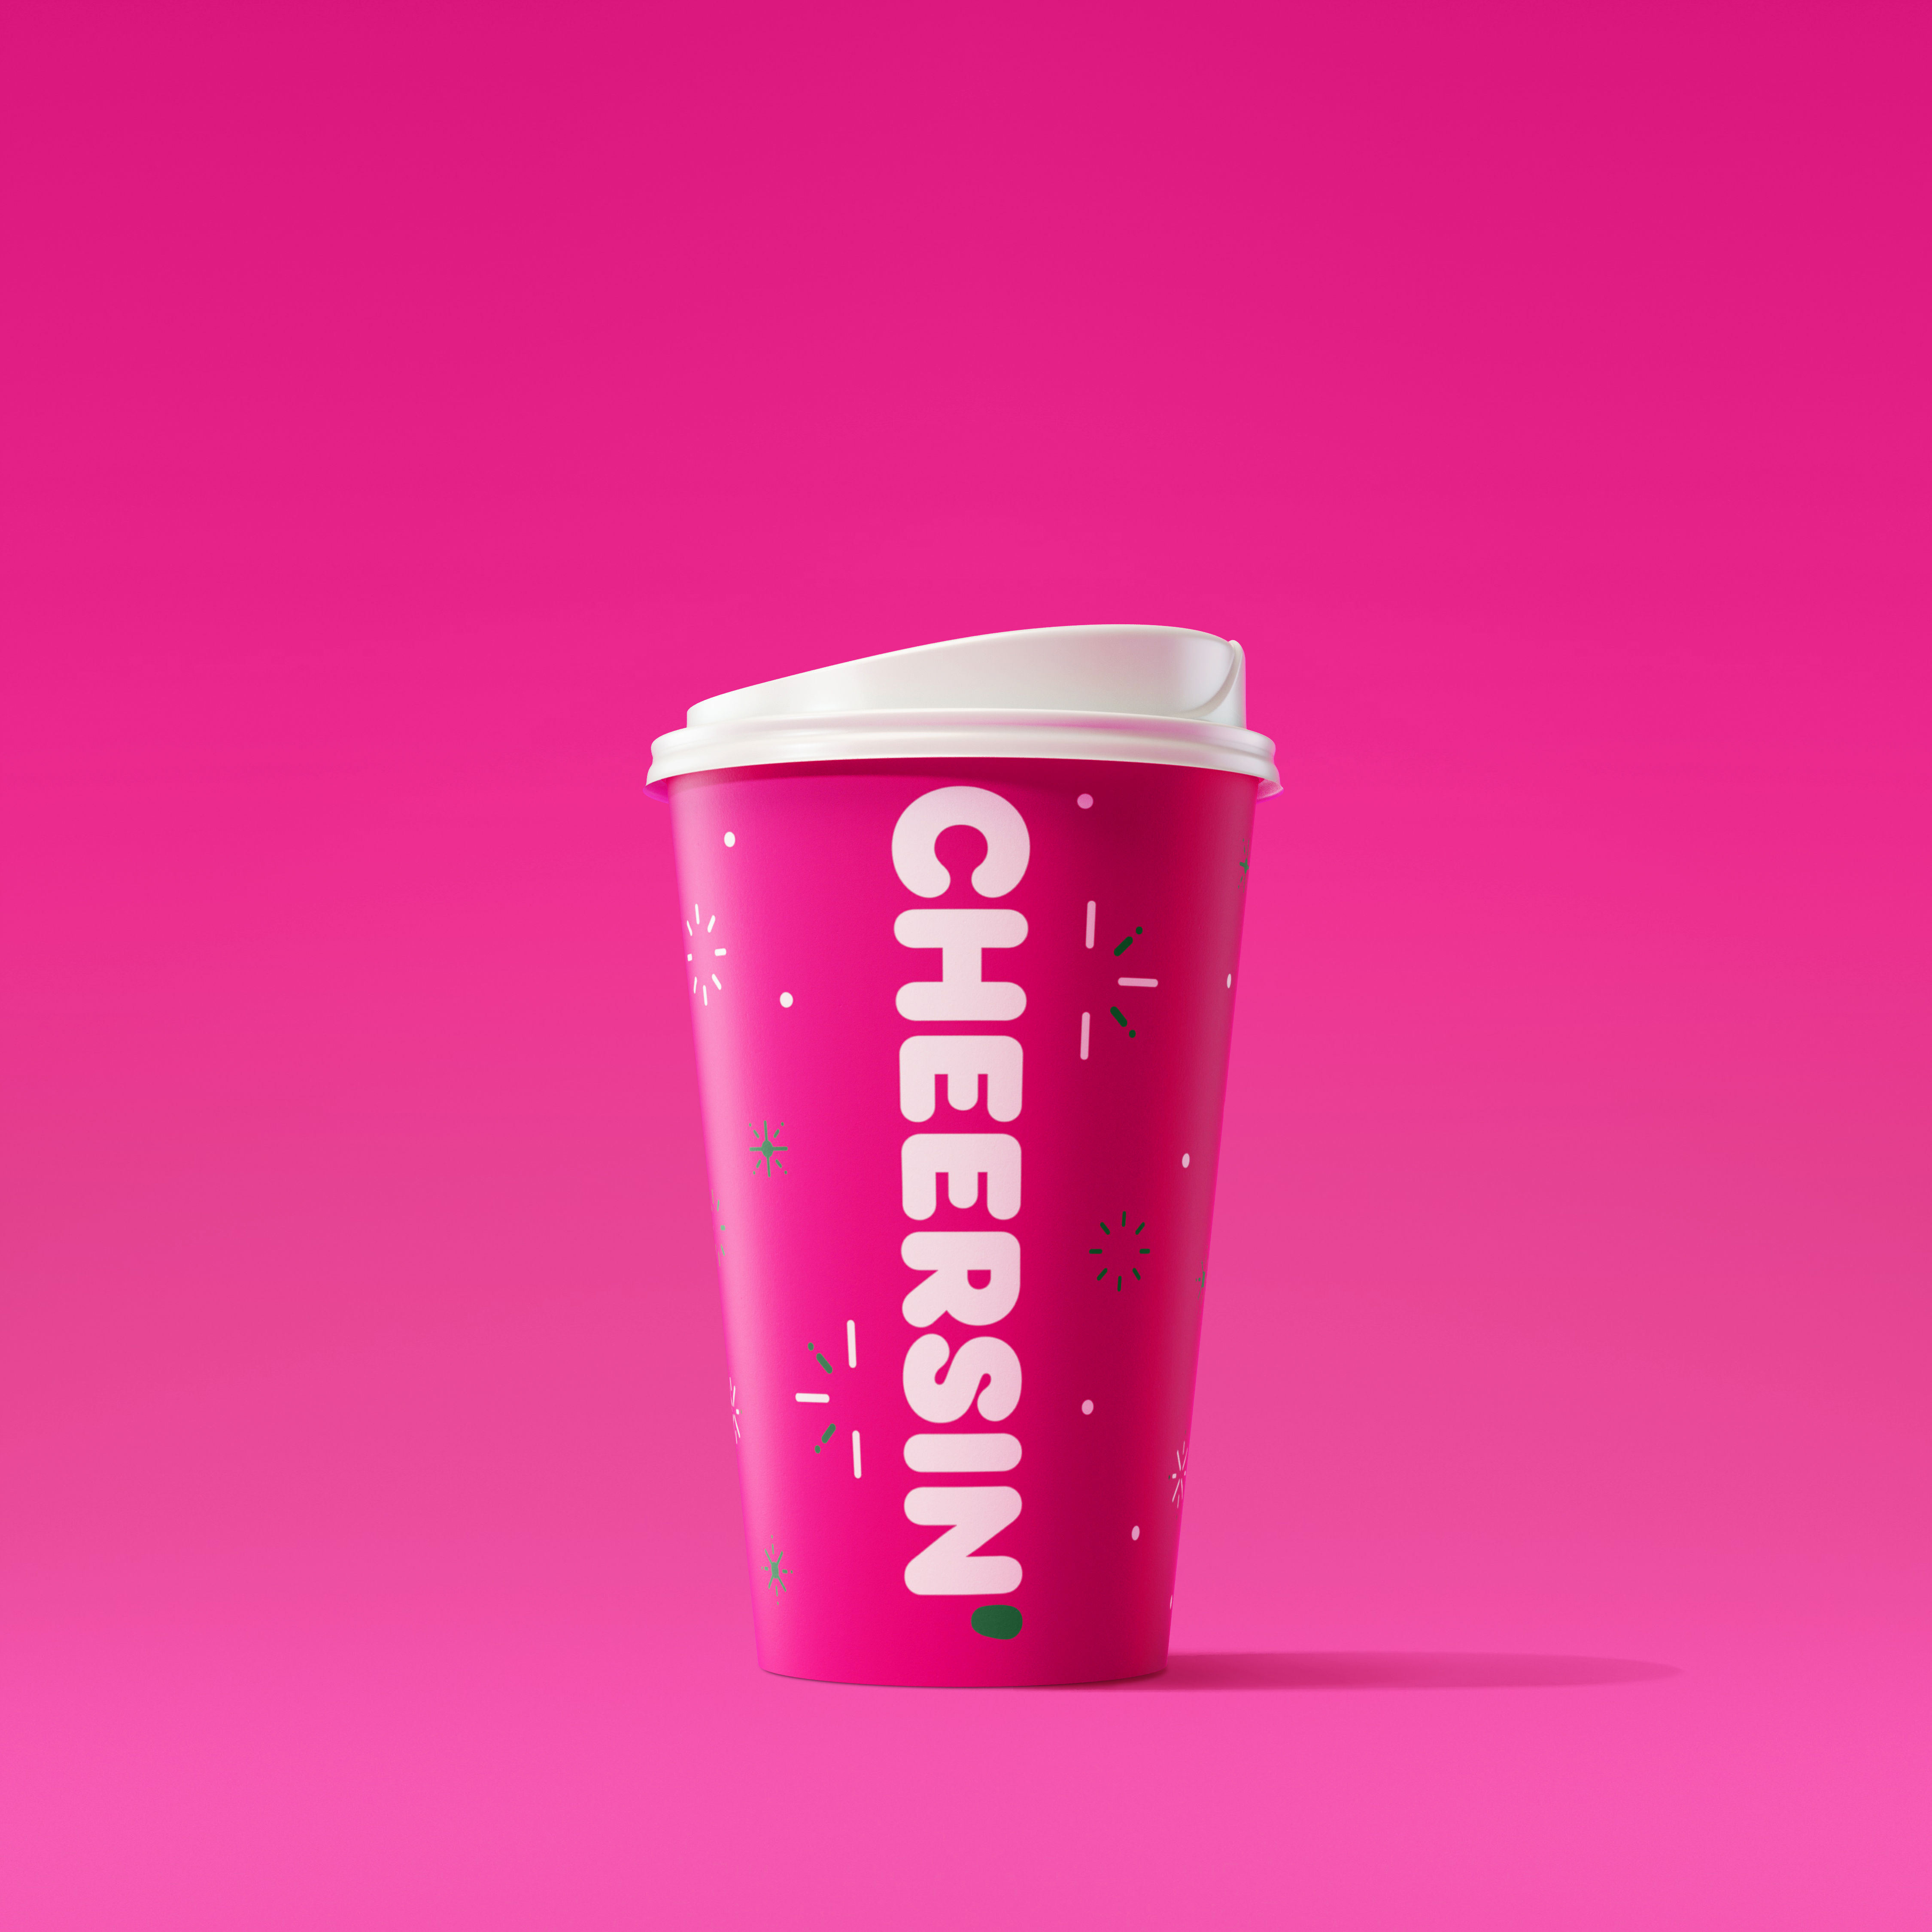 Dunkin' Holiday Cup Design Released, Dunkin